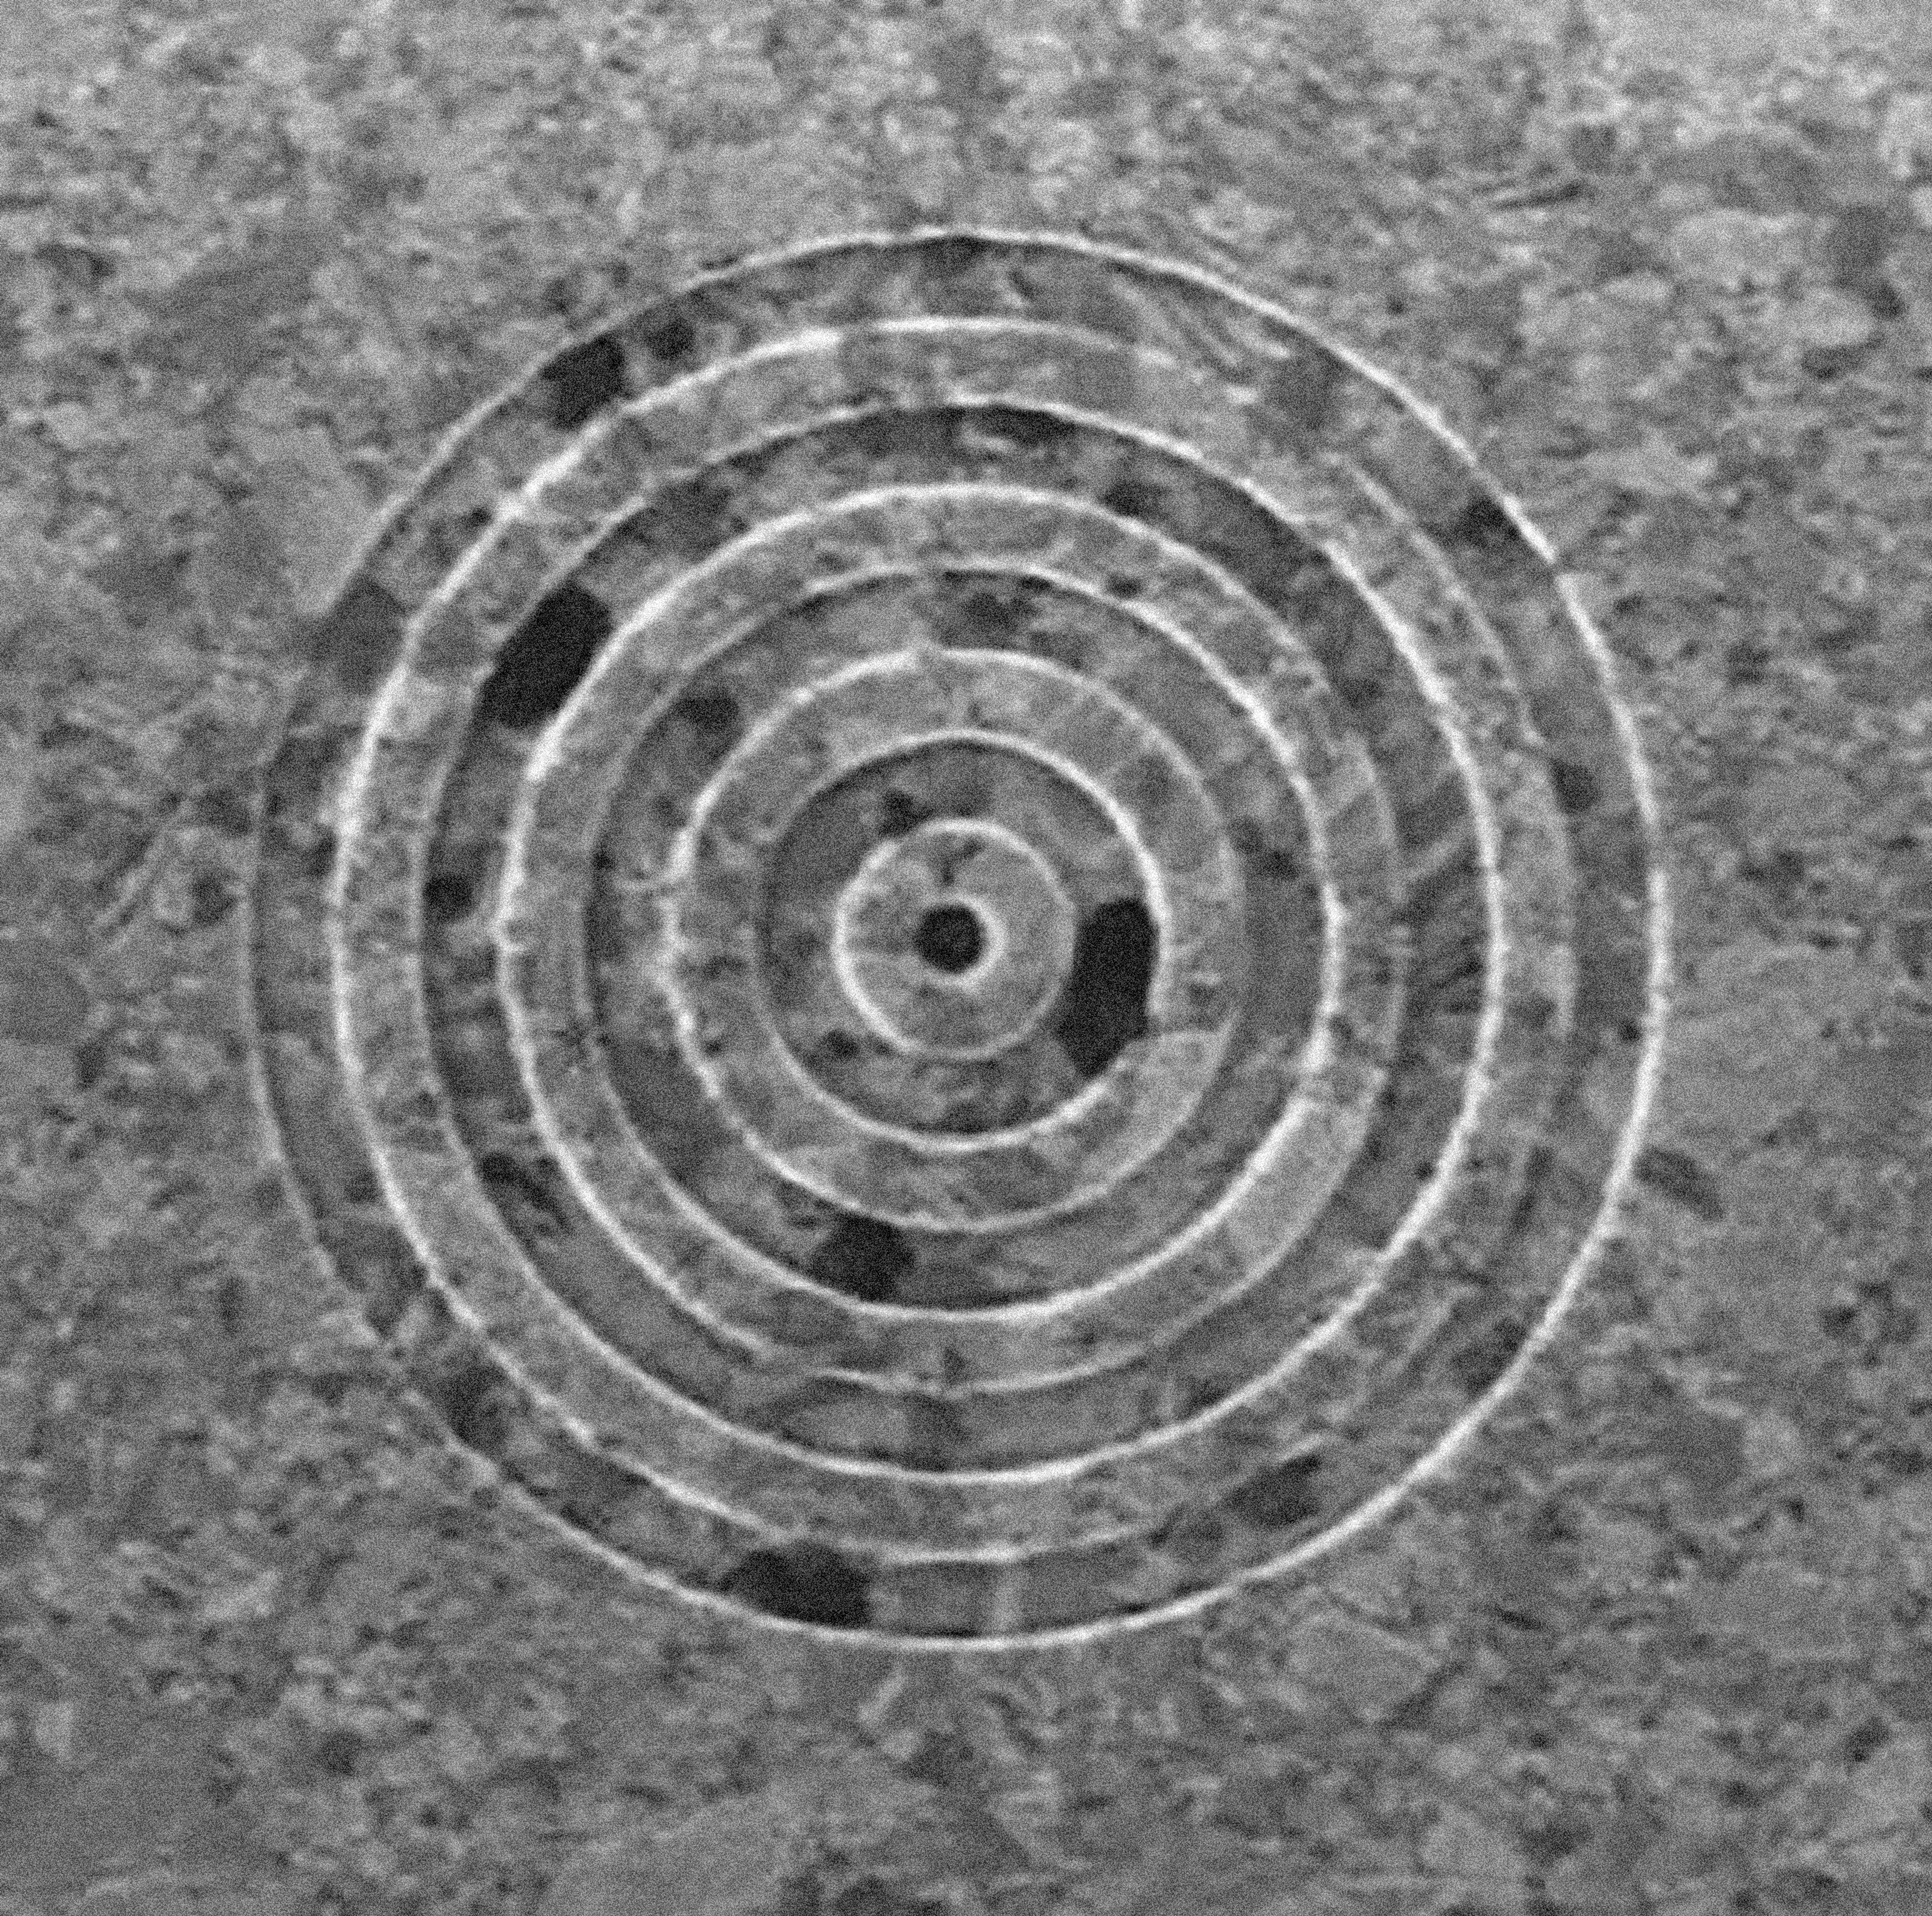 Focused ion beam micrograph image of the bull’s eye structure on a 300 nm-thick silver film used to demonstrated transmission through a subwavelength hole